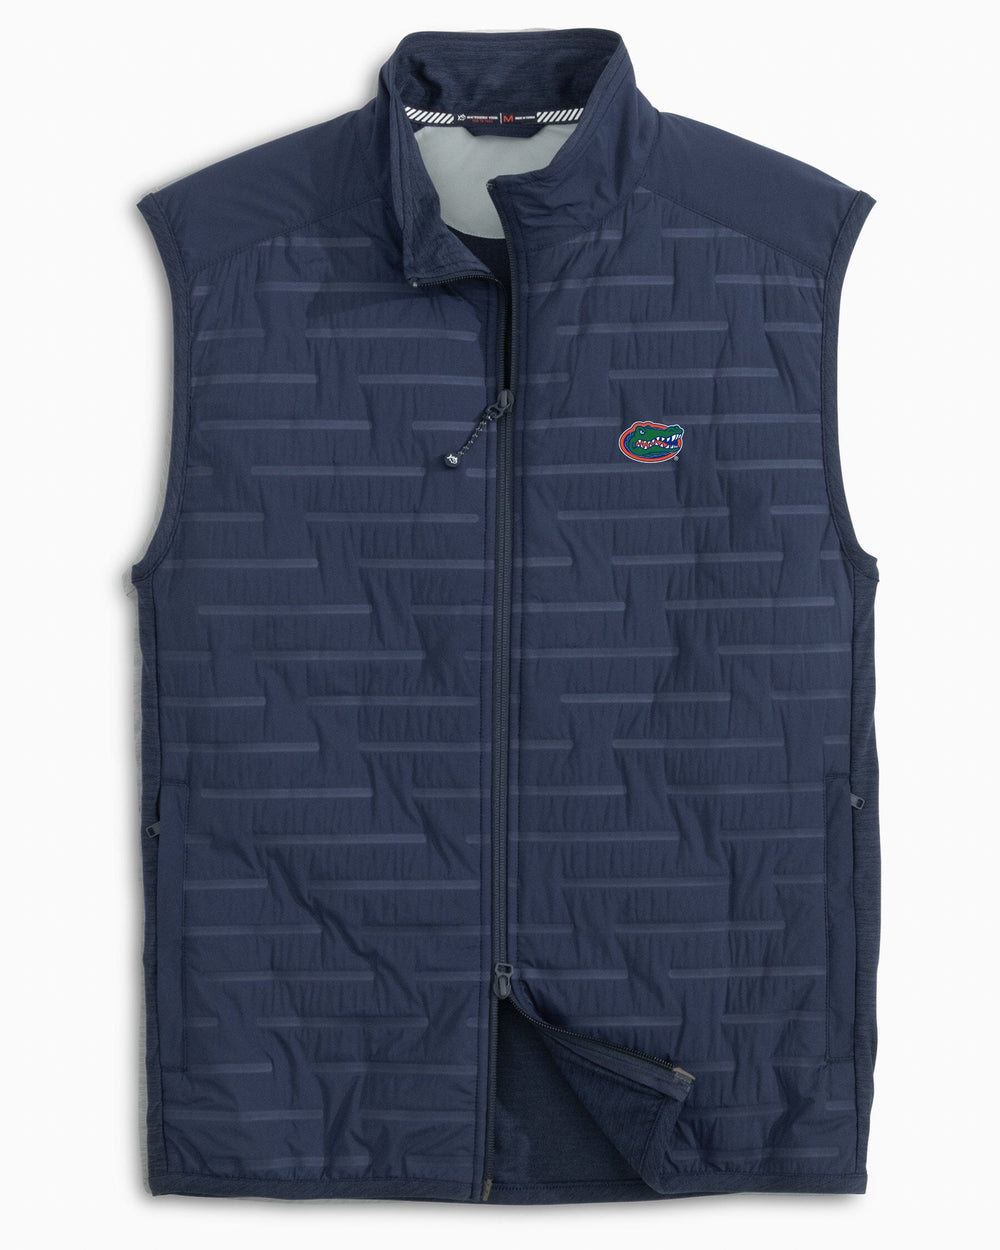 The front view of the Florida Gators Abercorn Vest by Southern Tide - True Navy